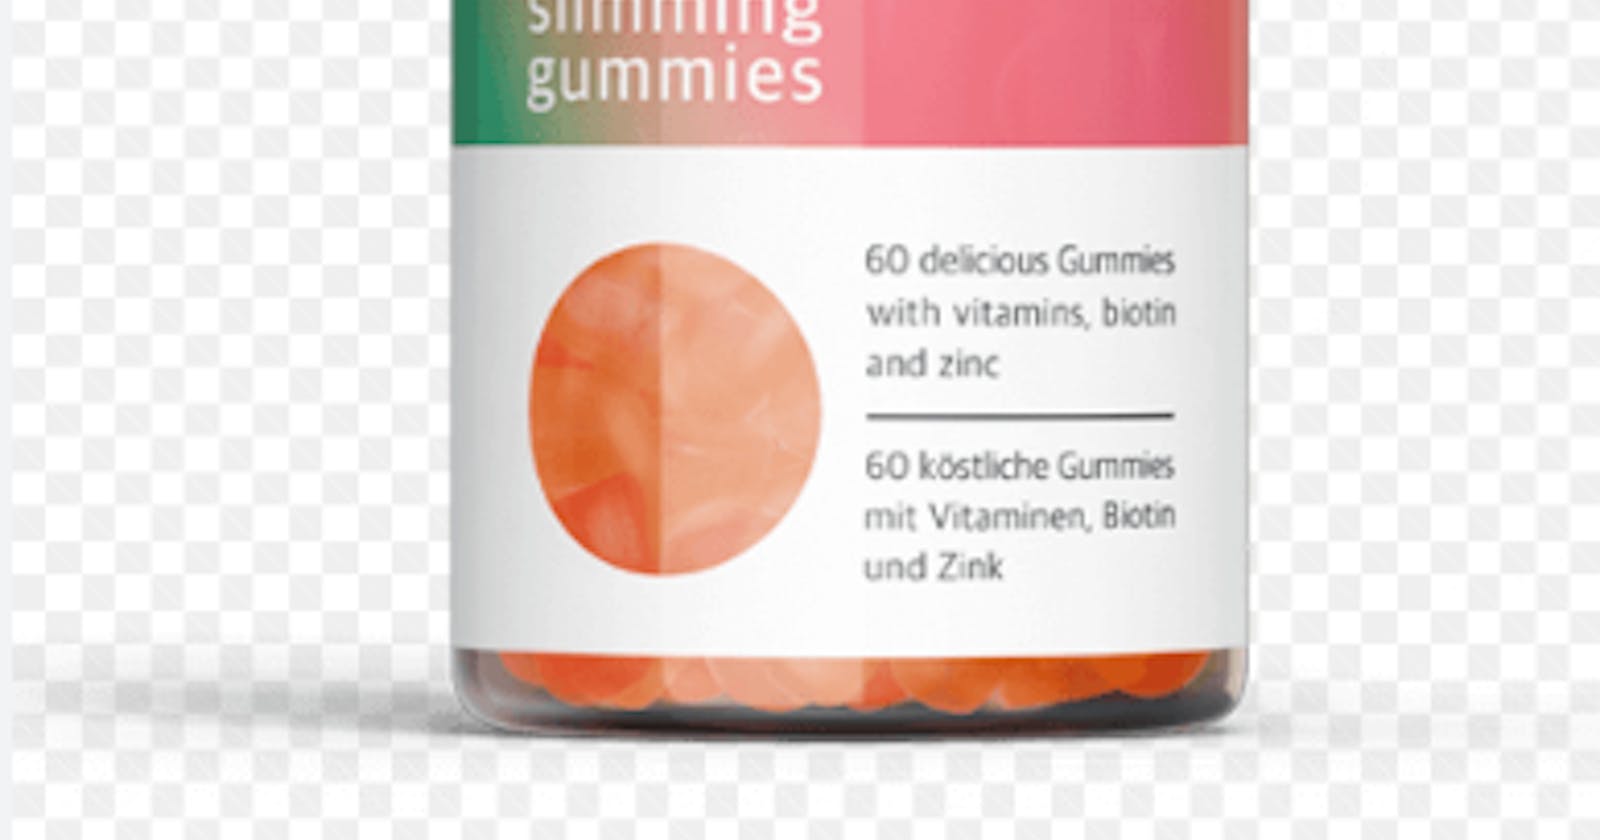 Slimming Gummies United Kingdom"TOP RESULT" [CONS or PROS] Full Reviews!!